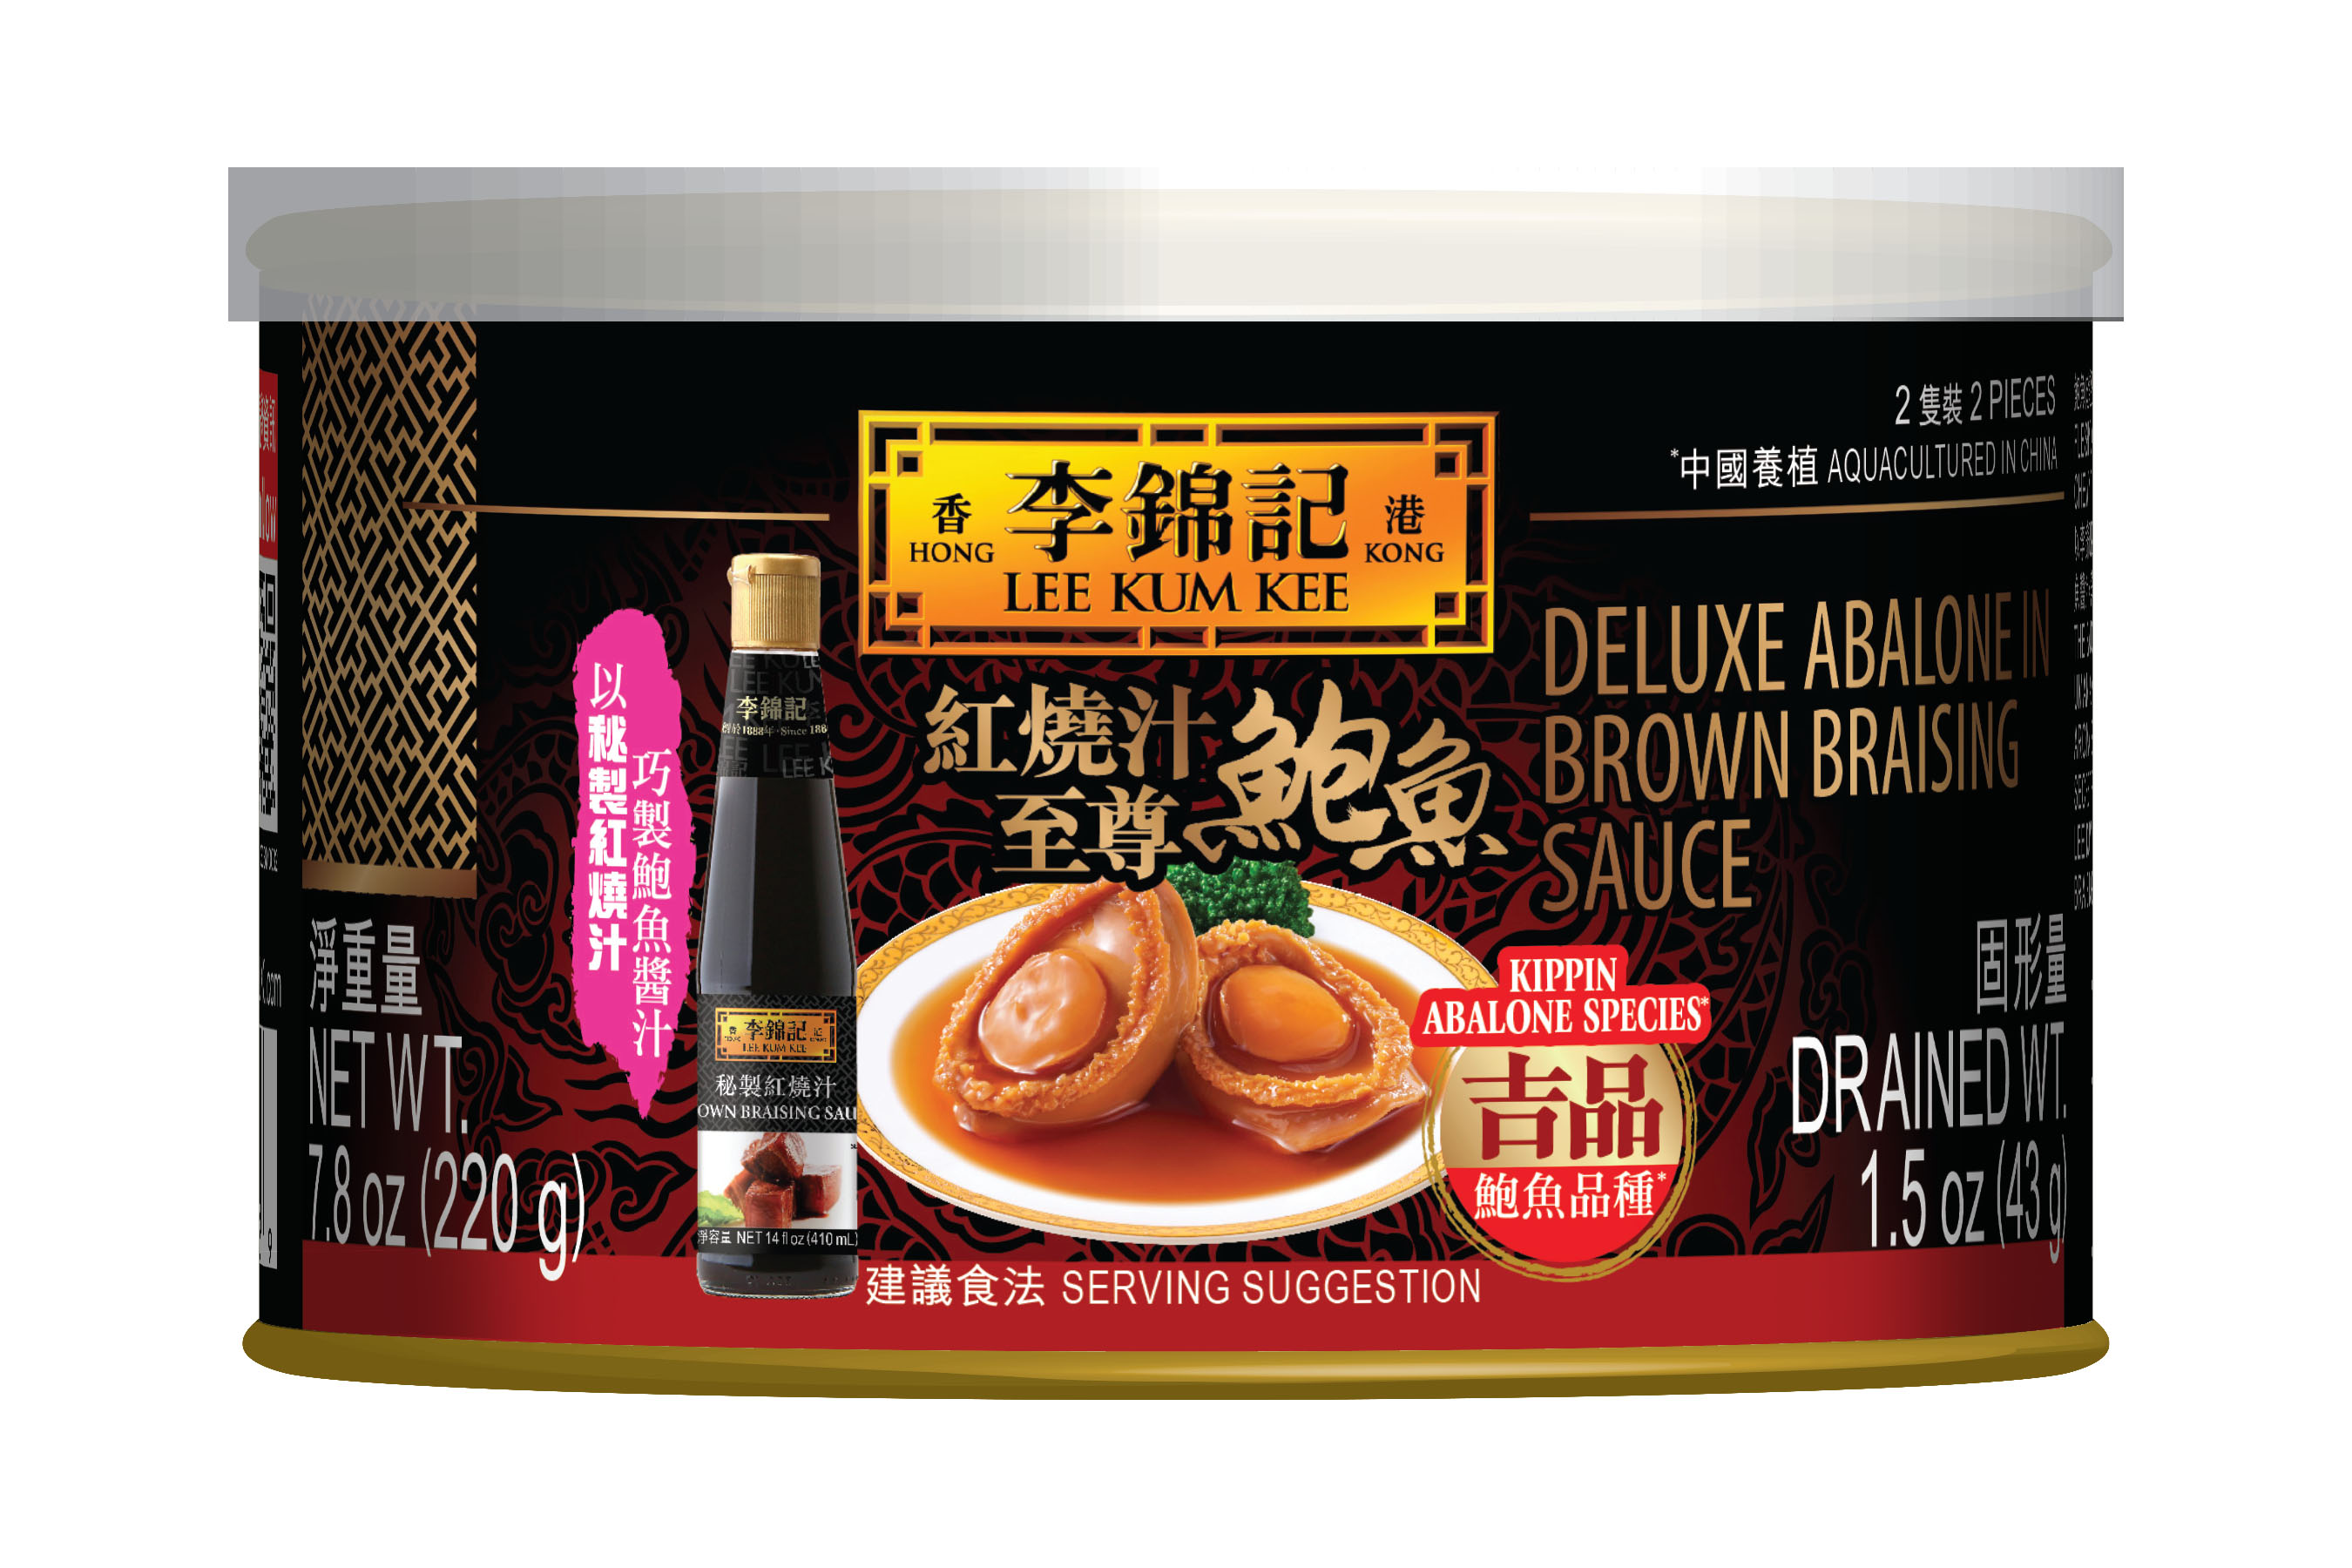 Deluxe Abalone in Brown Braising Sauce 7.8 oz (220 g)